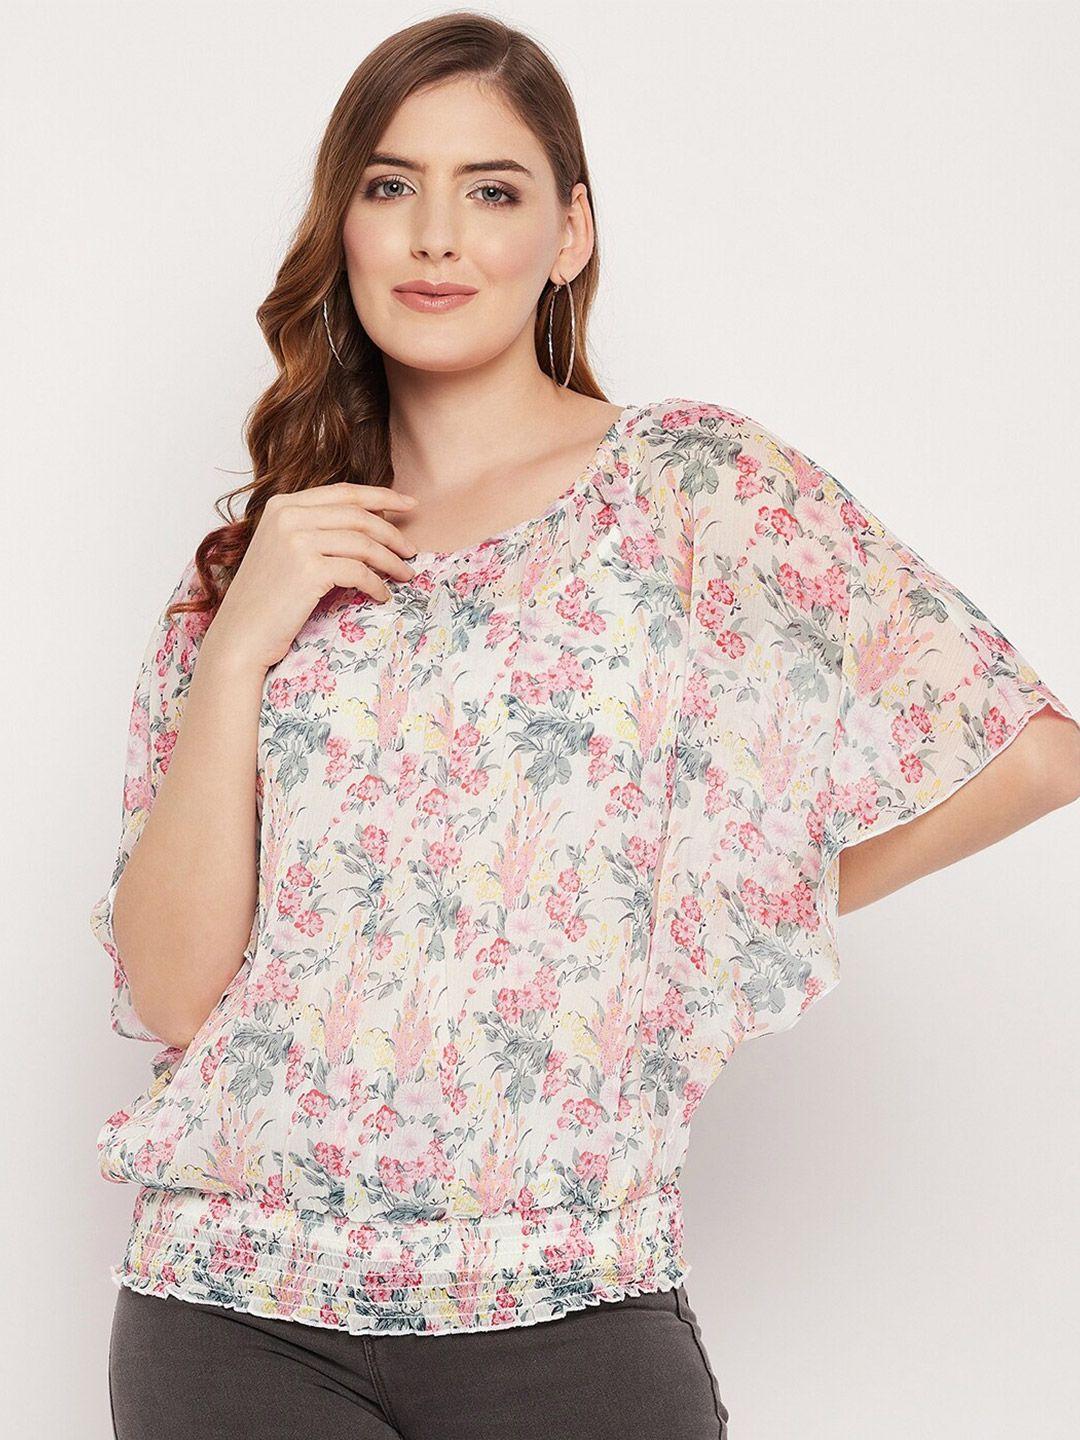 style blush floral printed batwing sleeves blouson top